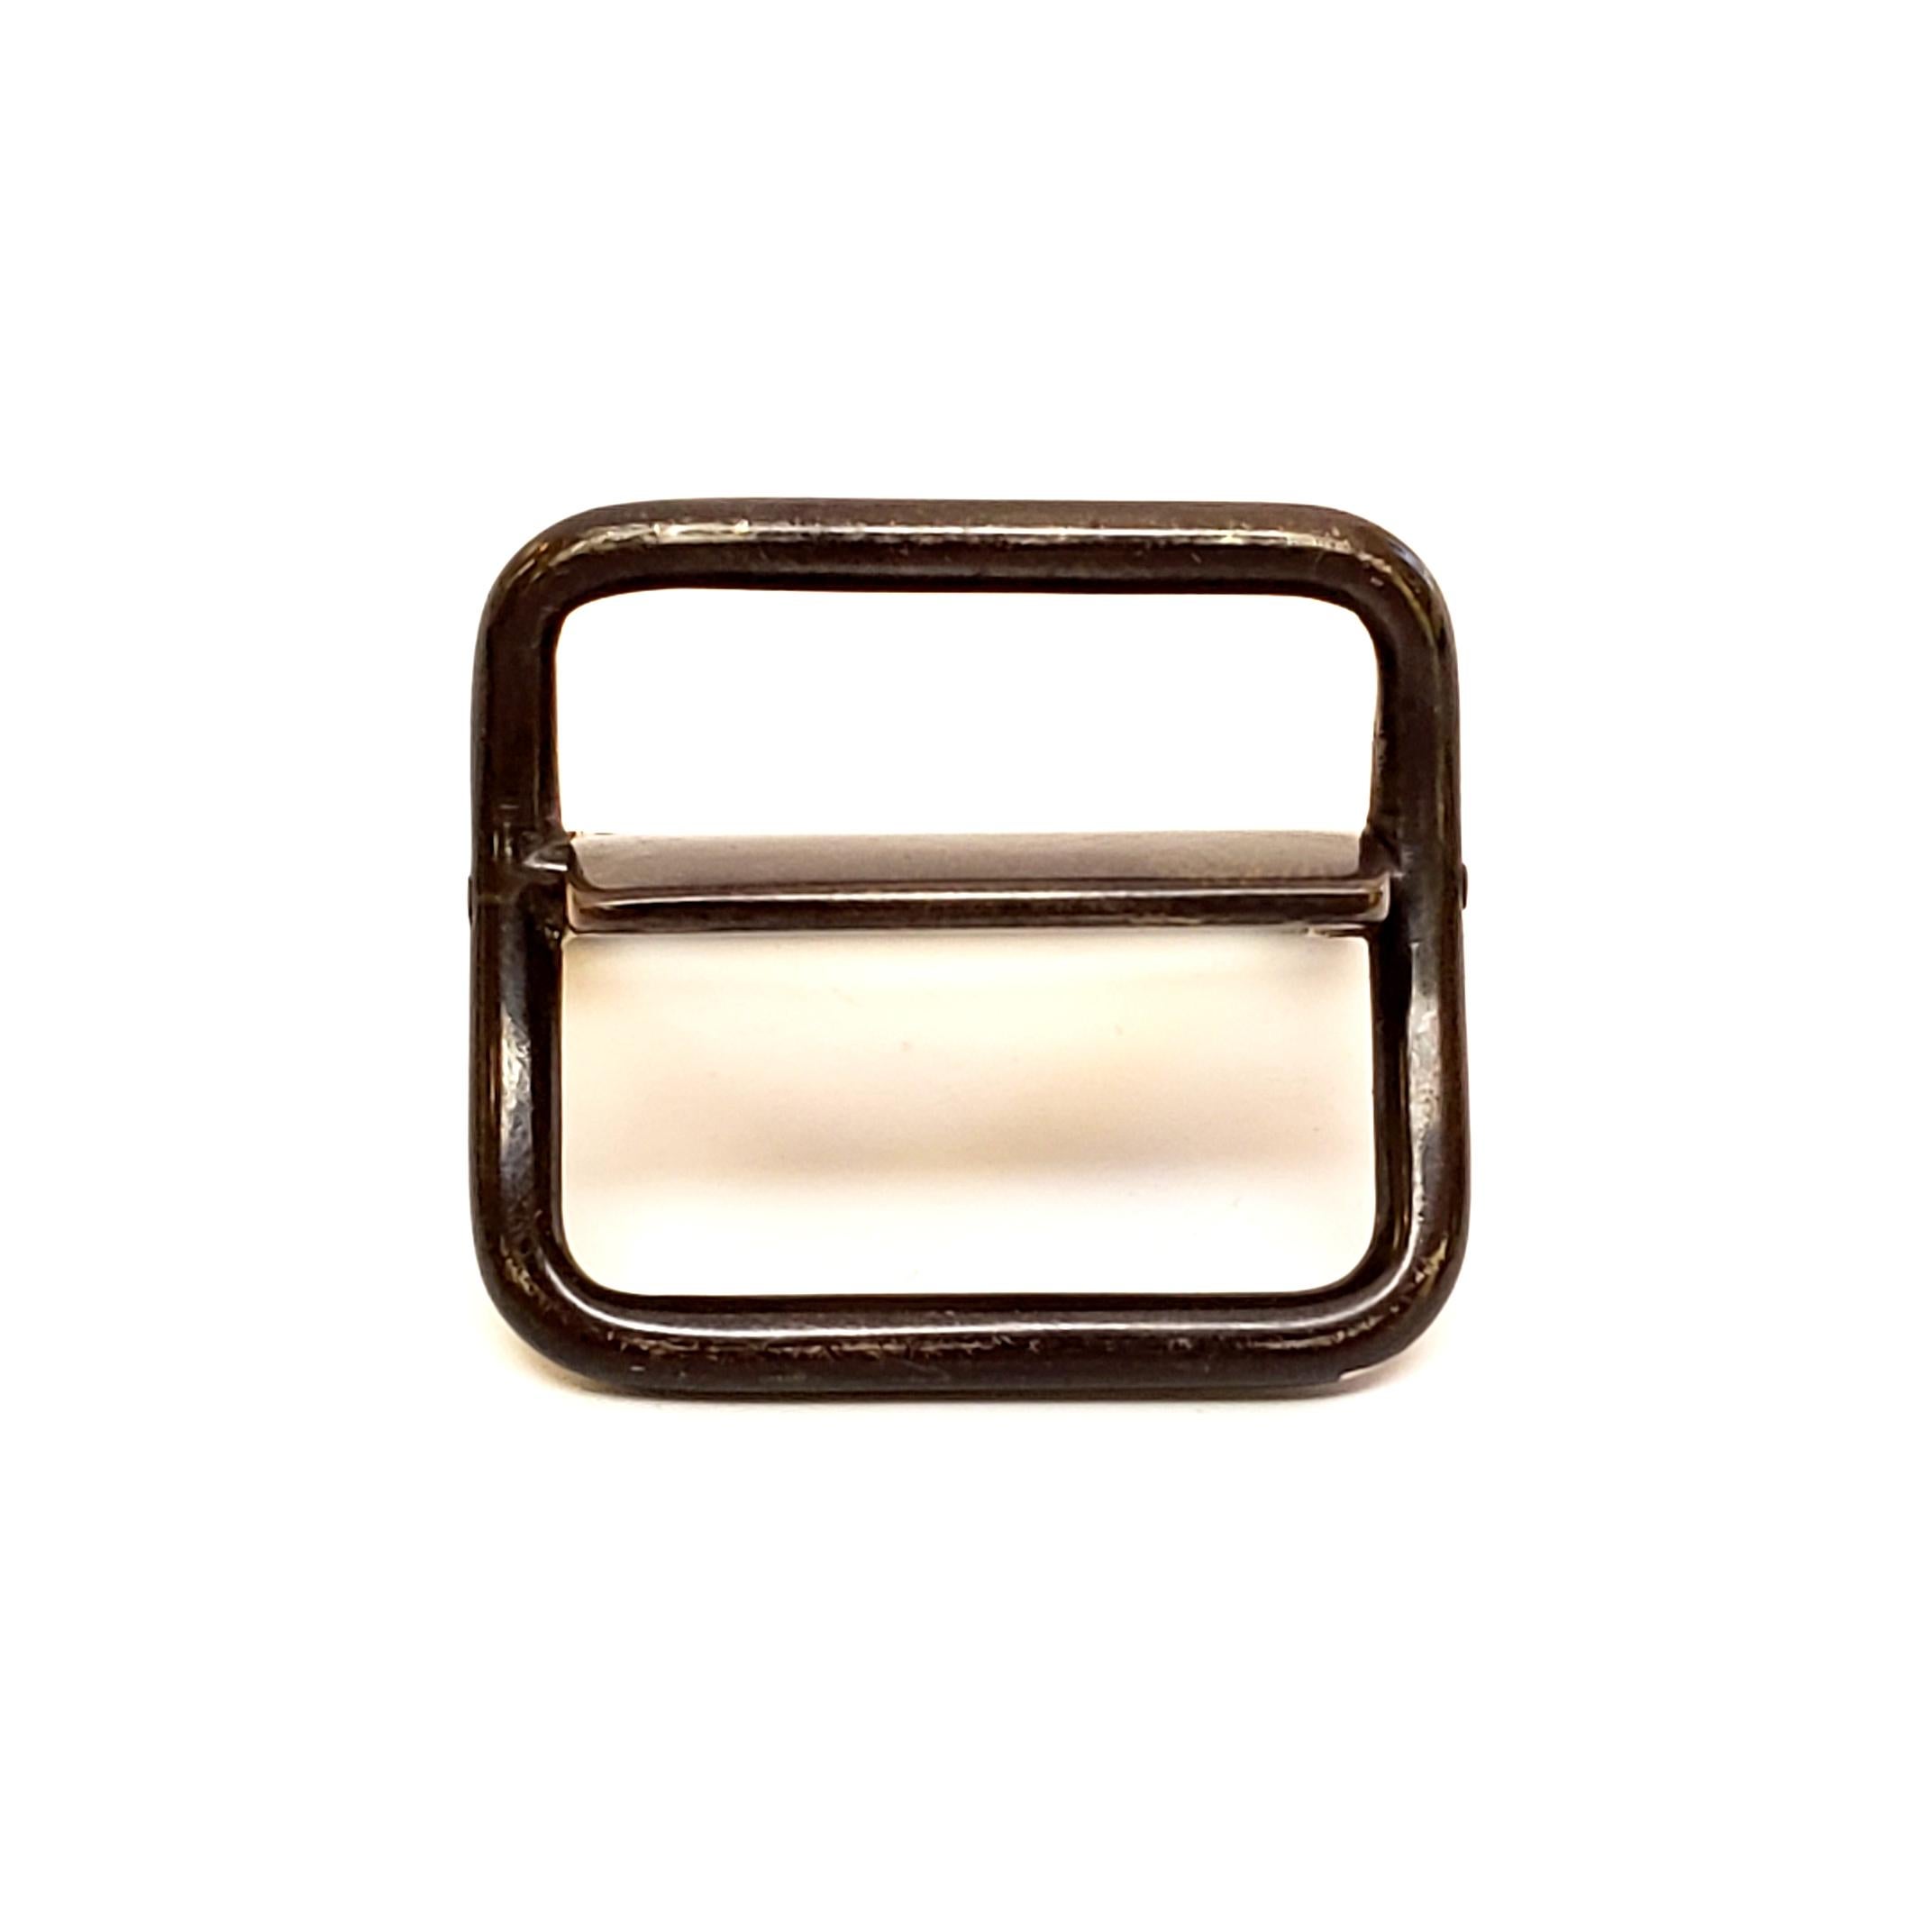 Vintage small sterling silver sash/belt buckle by Tiffany & Co, circa 1907-1947.

Simple square design made under the directorship of John C. Moore.

Measures 1 1/2